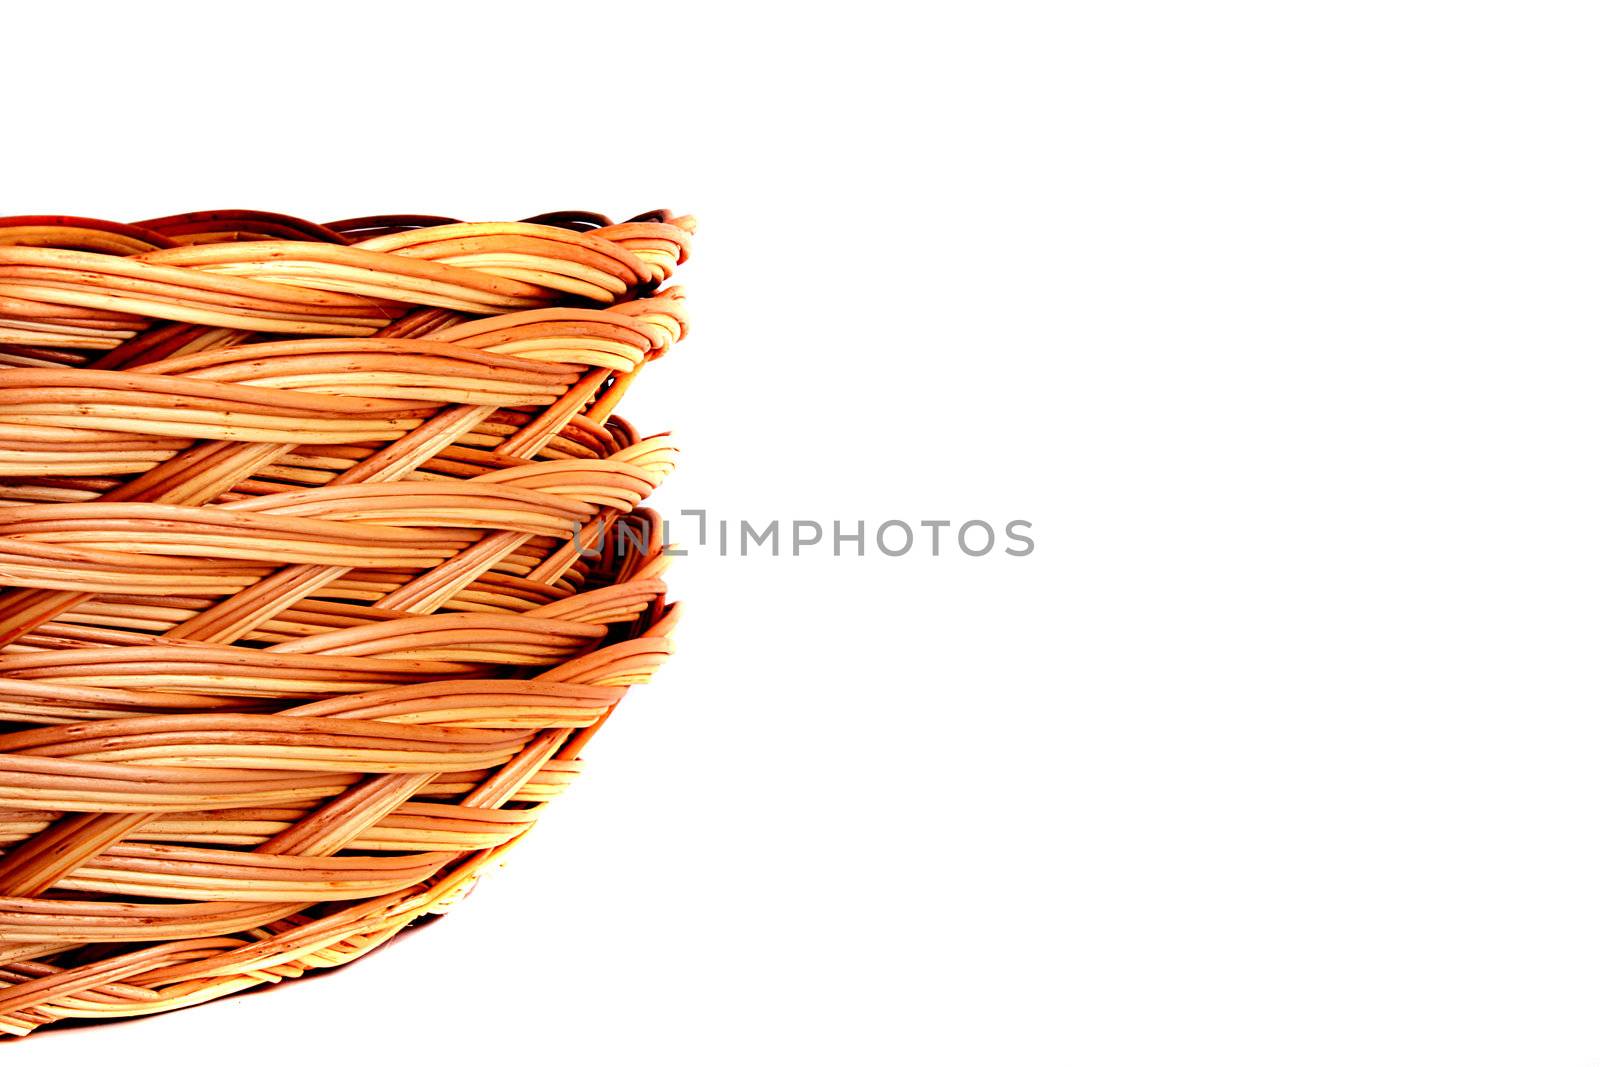 Five flat baskets for use in dressing on a white background.